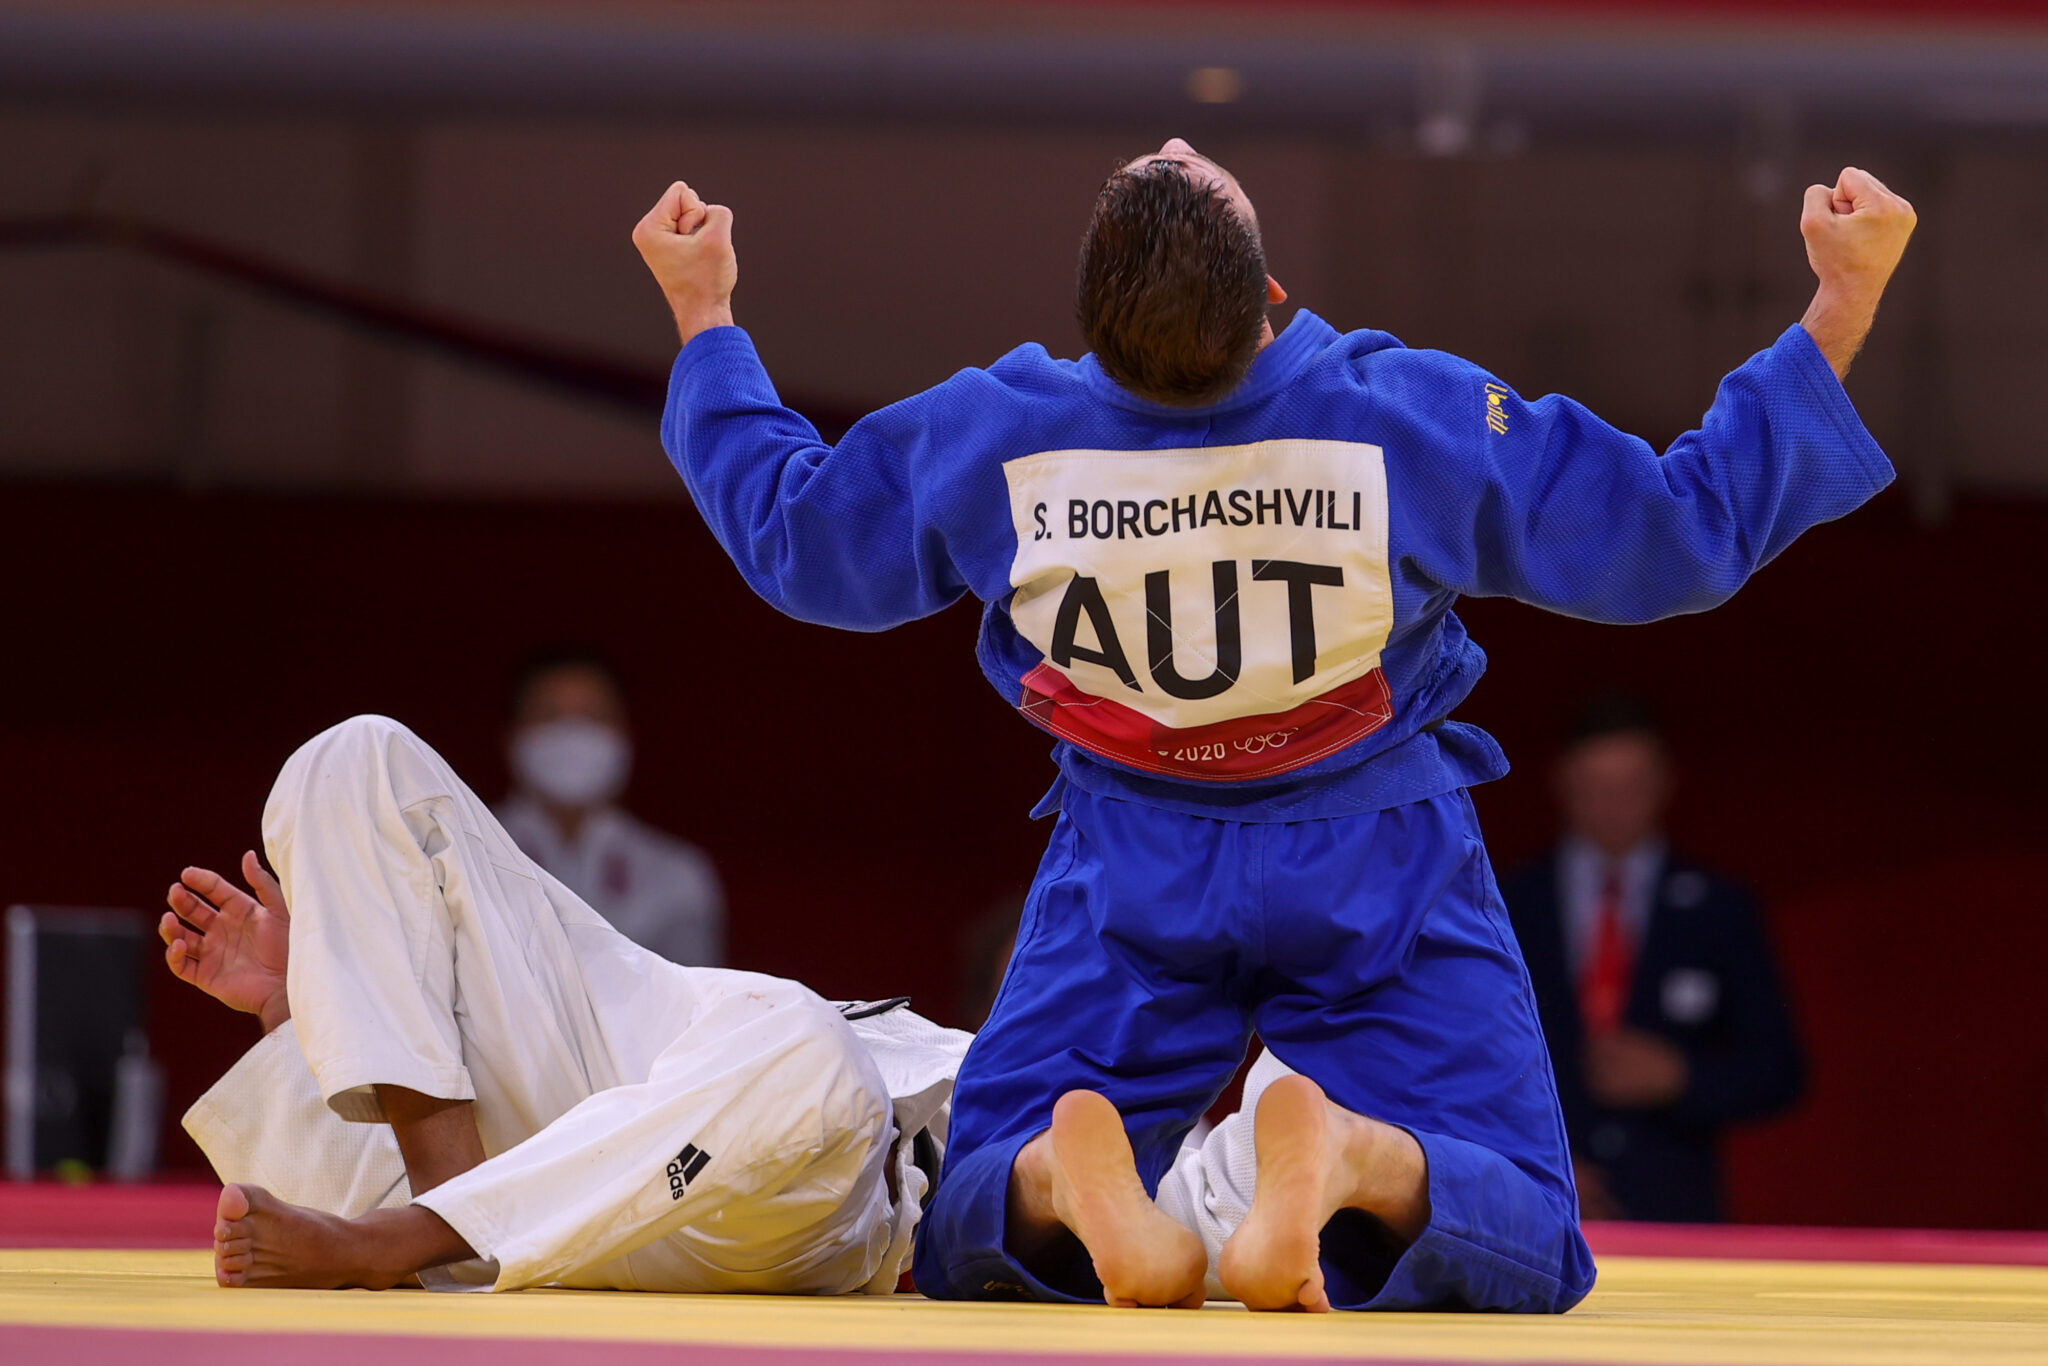 JUDO AUSTRIA WELCOMES BACK IJF TOUR IN MAY